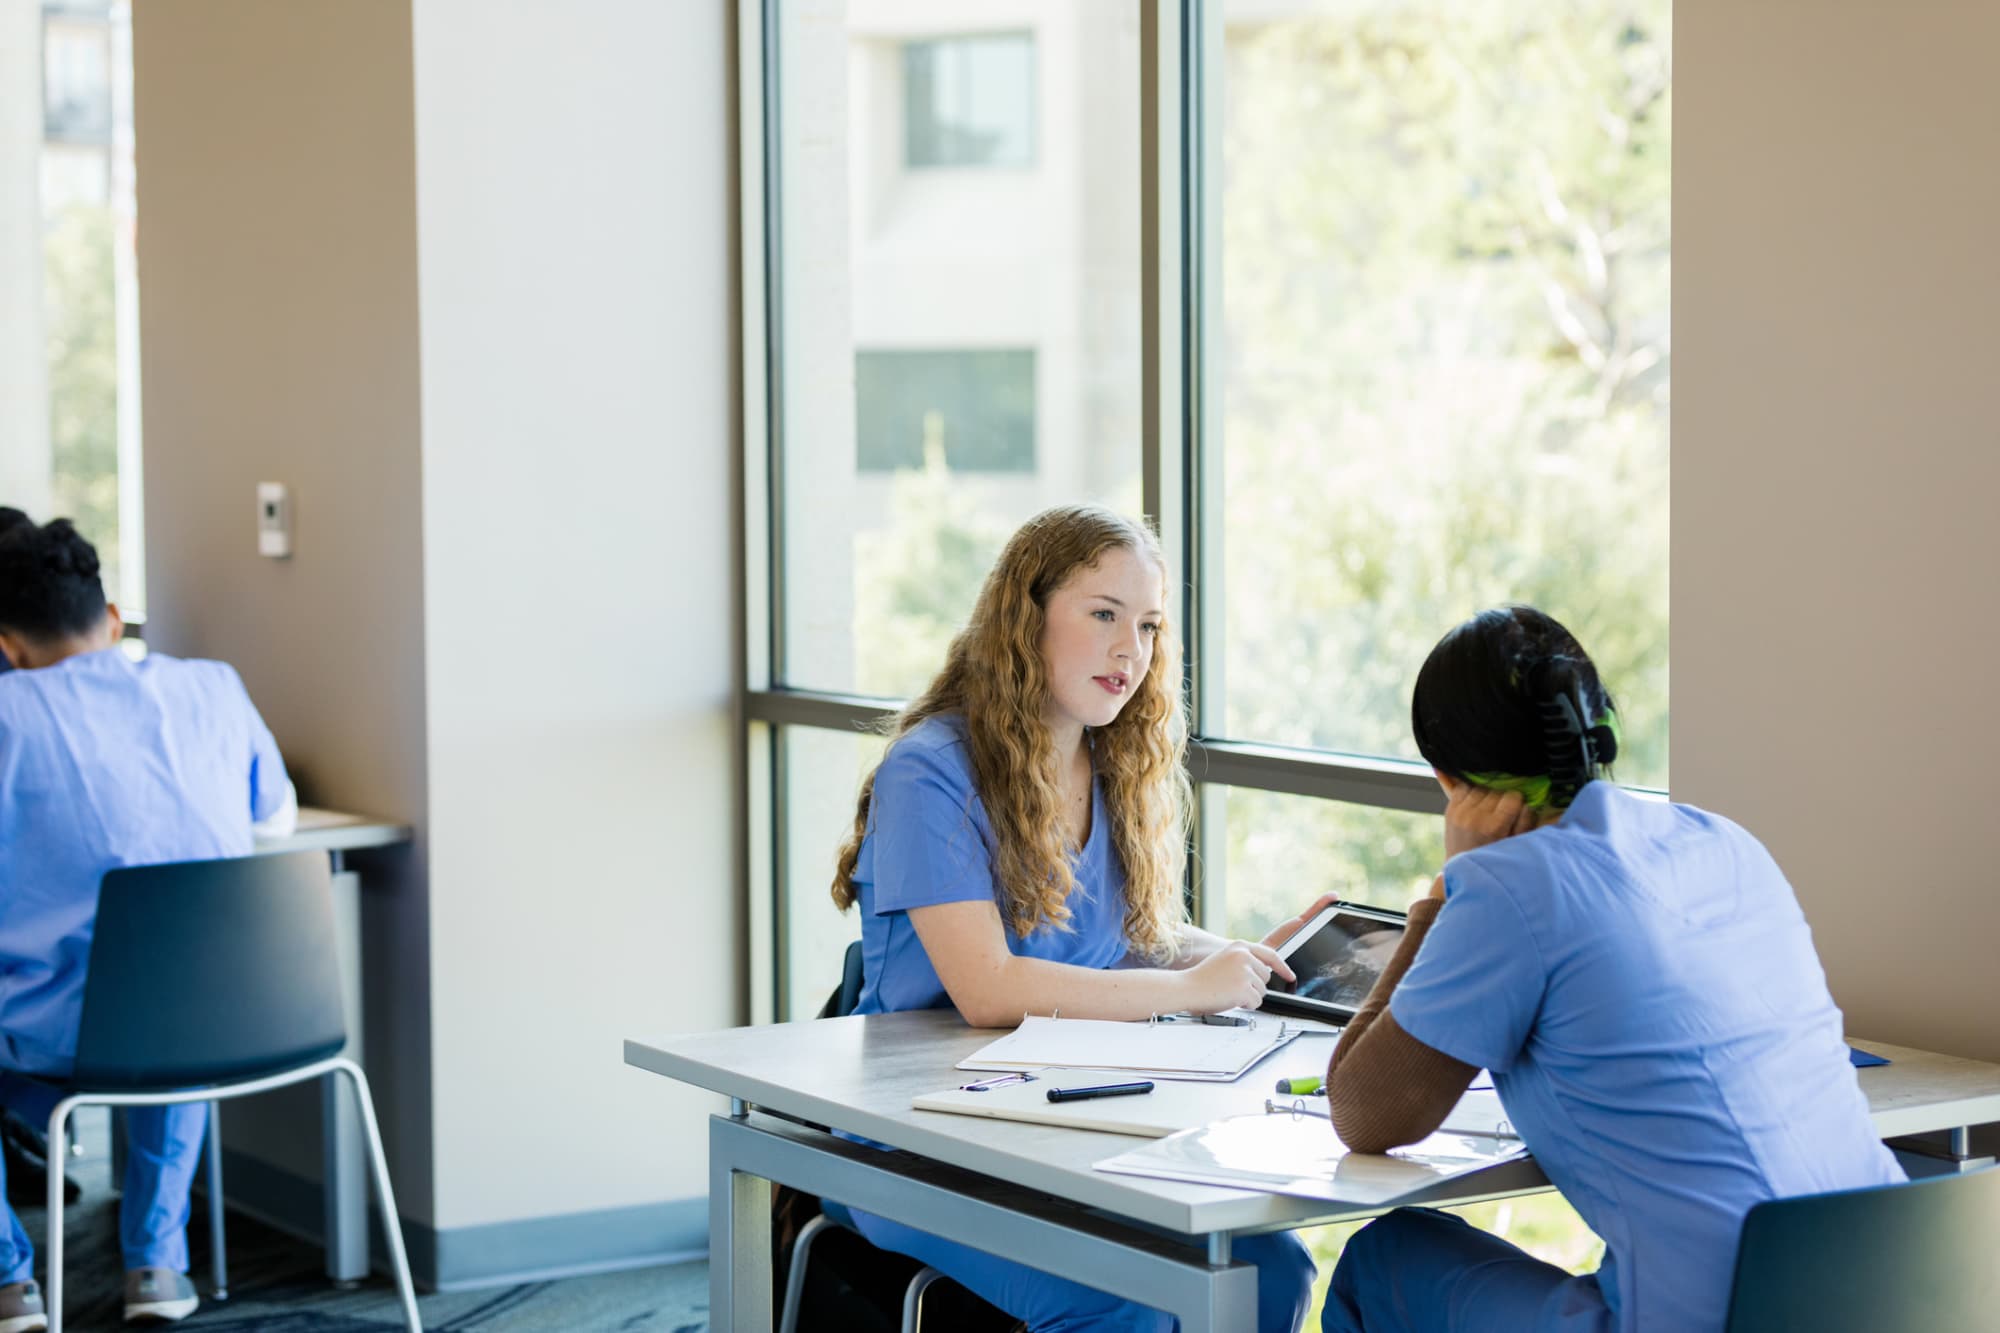 Nursing students studying together at a table